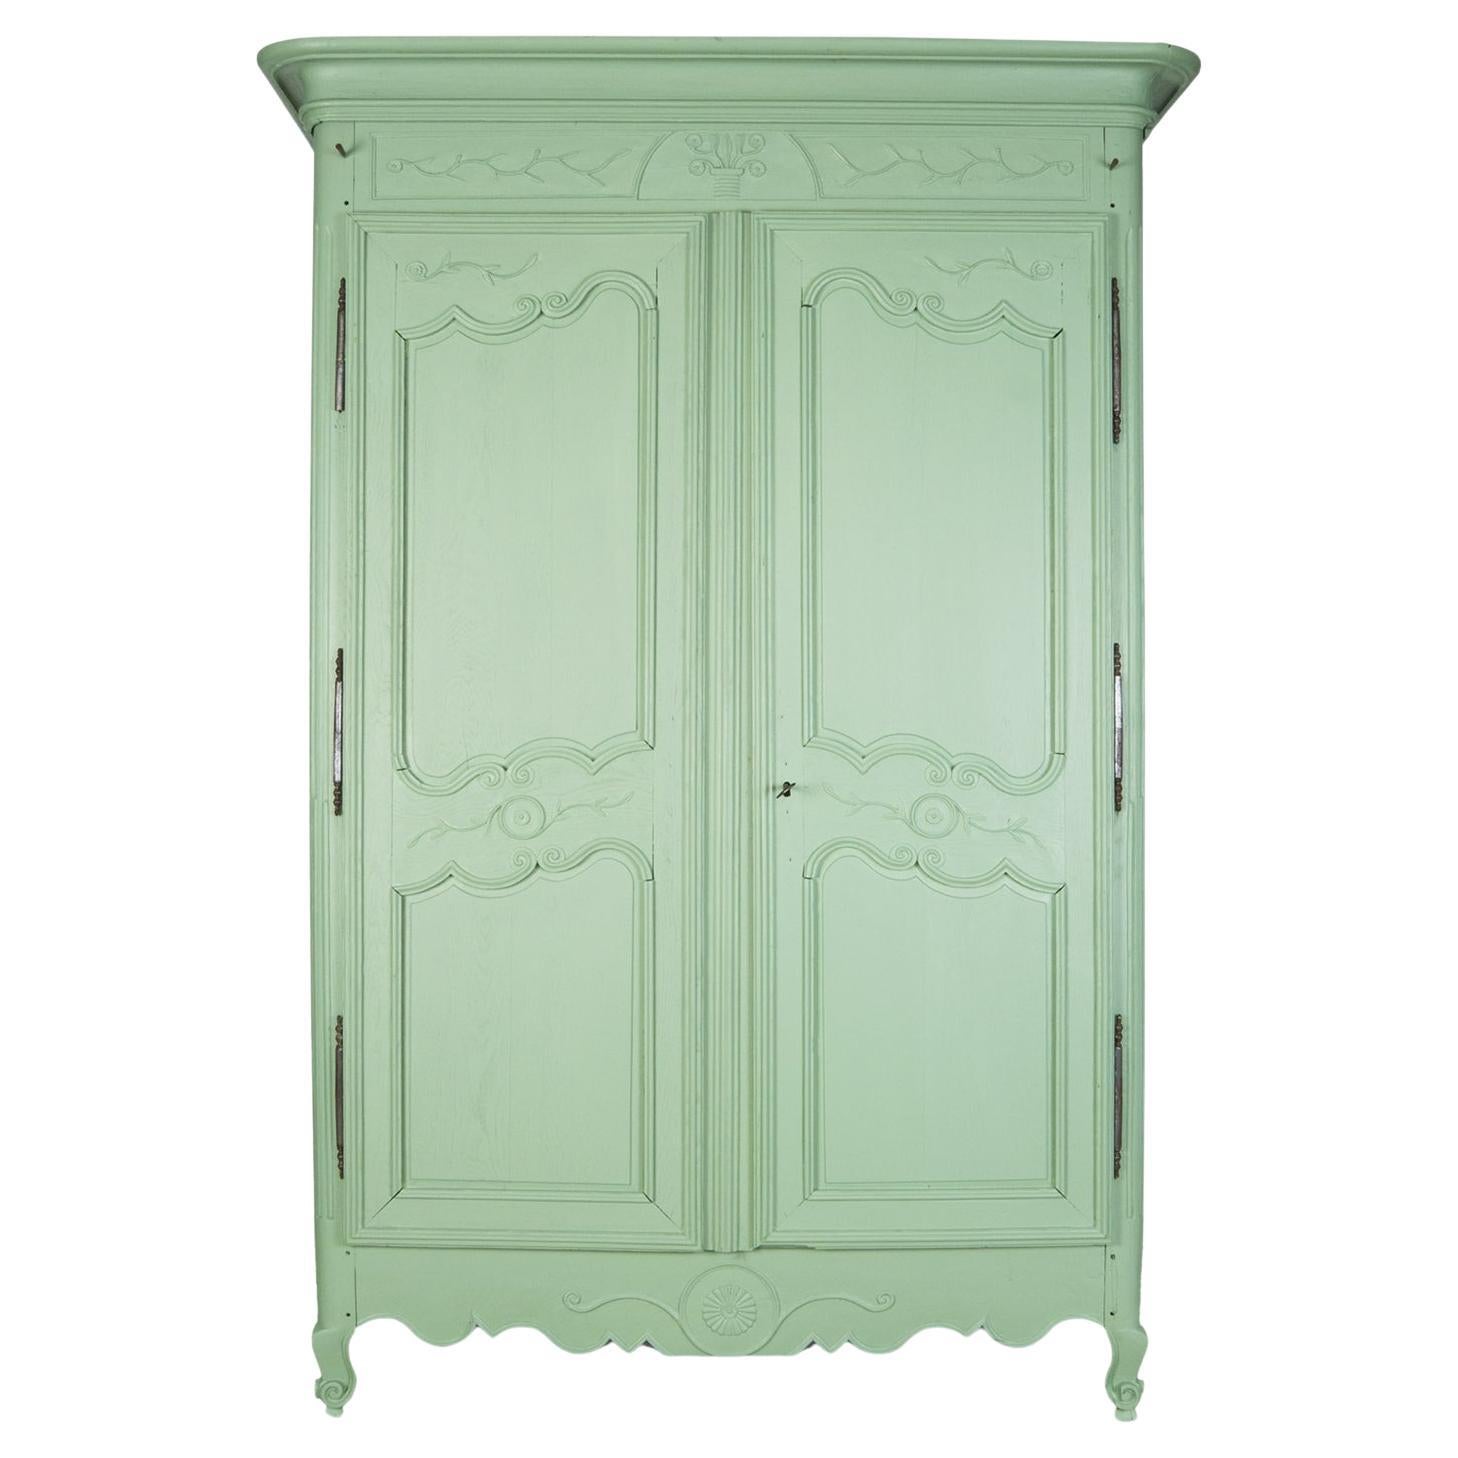 Lovely Antique 19th C Soft Green French Marriage Armoire or Wardrobe For Sale